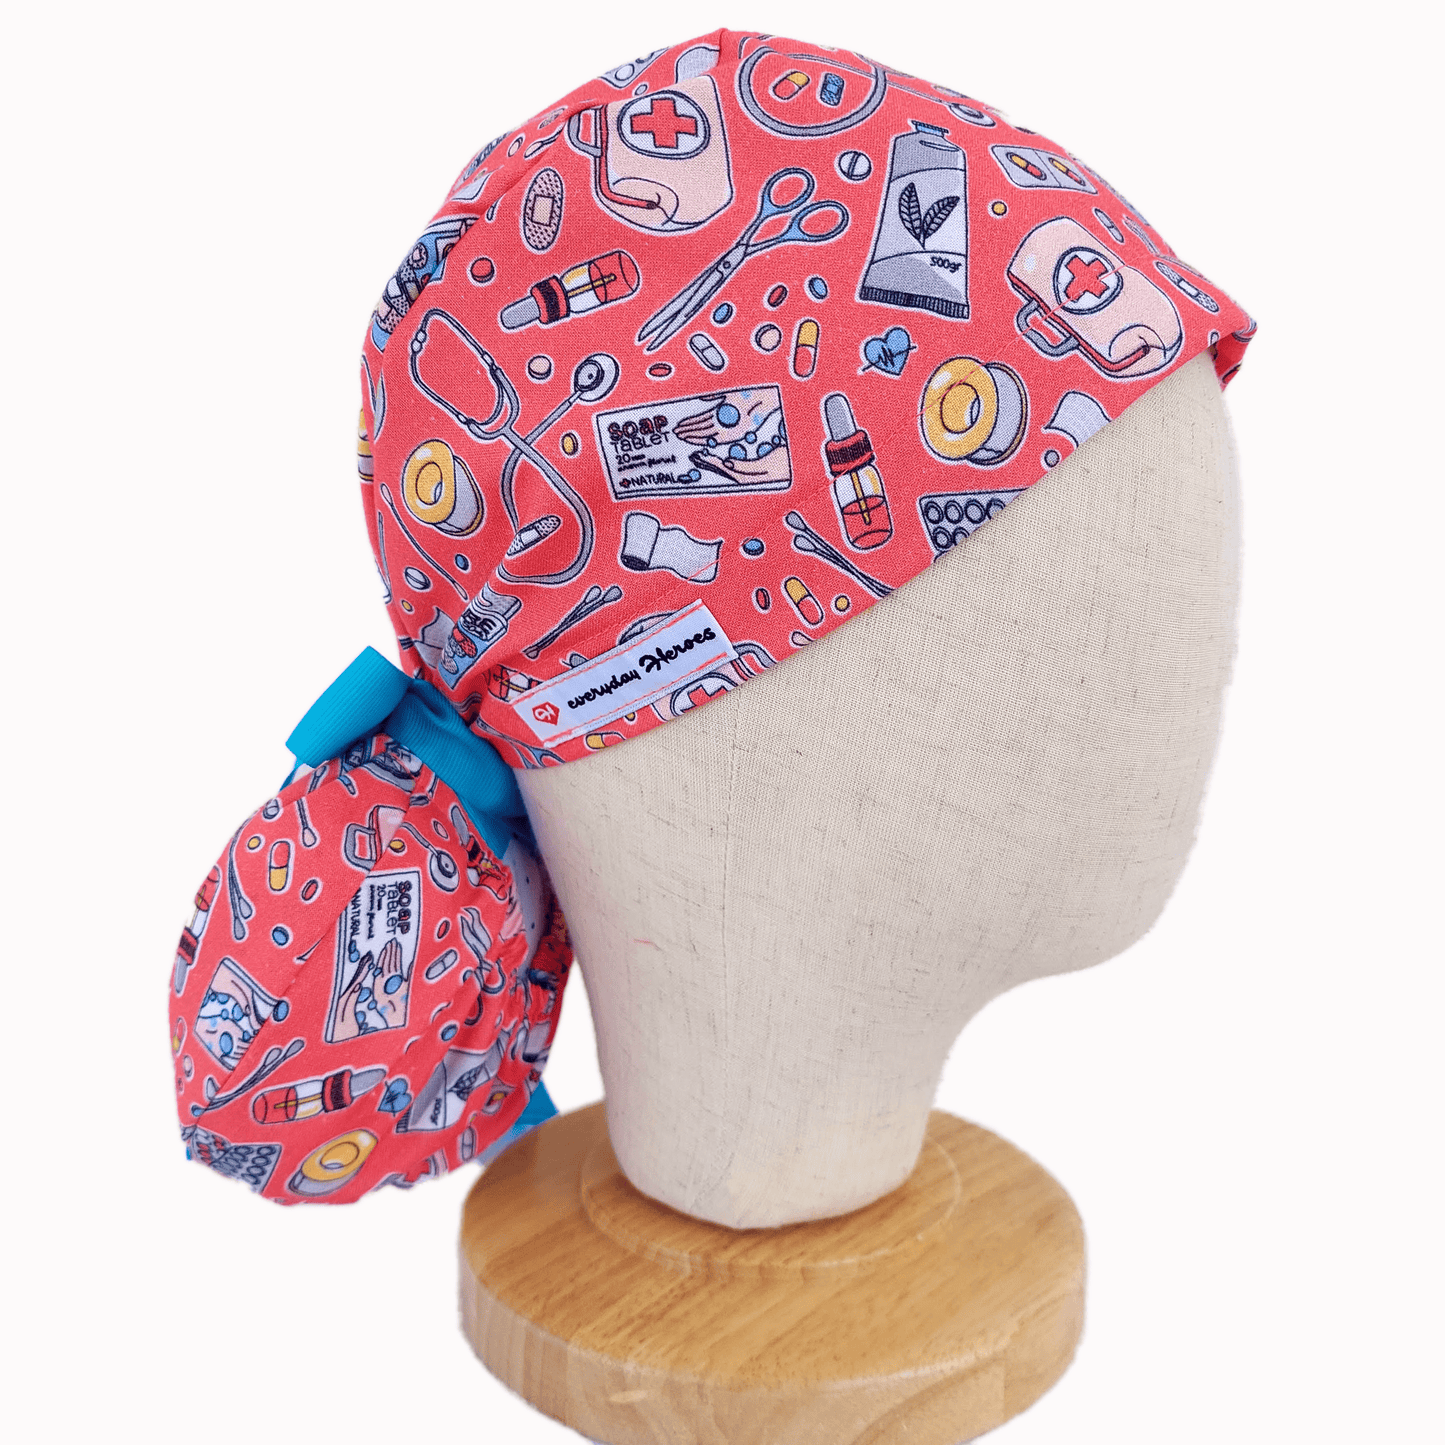 Everyday Heroes-Store Ponytail Scrub Cap medicines print, surgical cap for women with medium long hair. This is the perfect accessory for Healthcare workers, Hospitals, Doctors, Nurses, Dentists, Veterinarians, Labs, Chefs and many others.